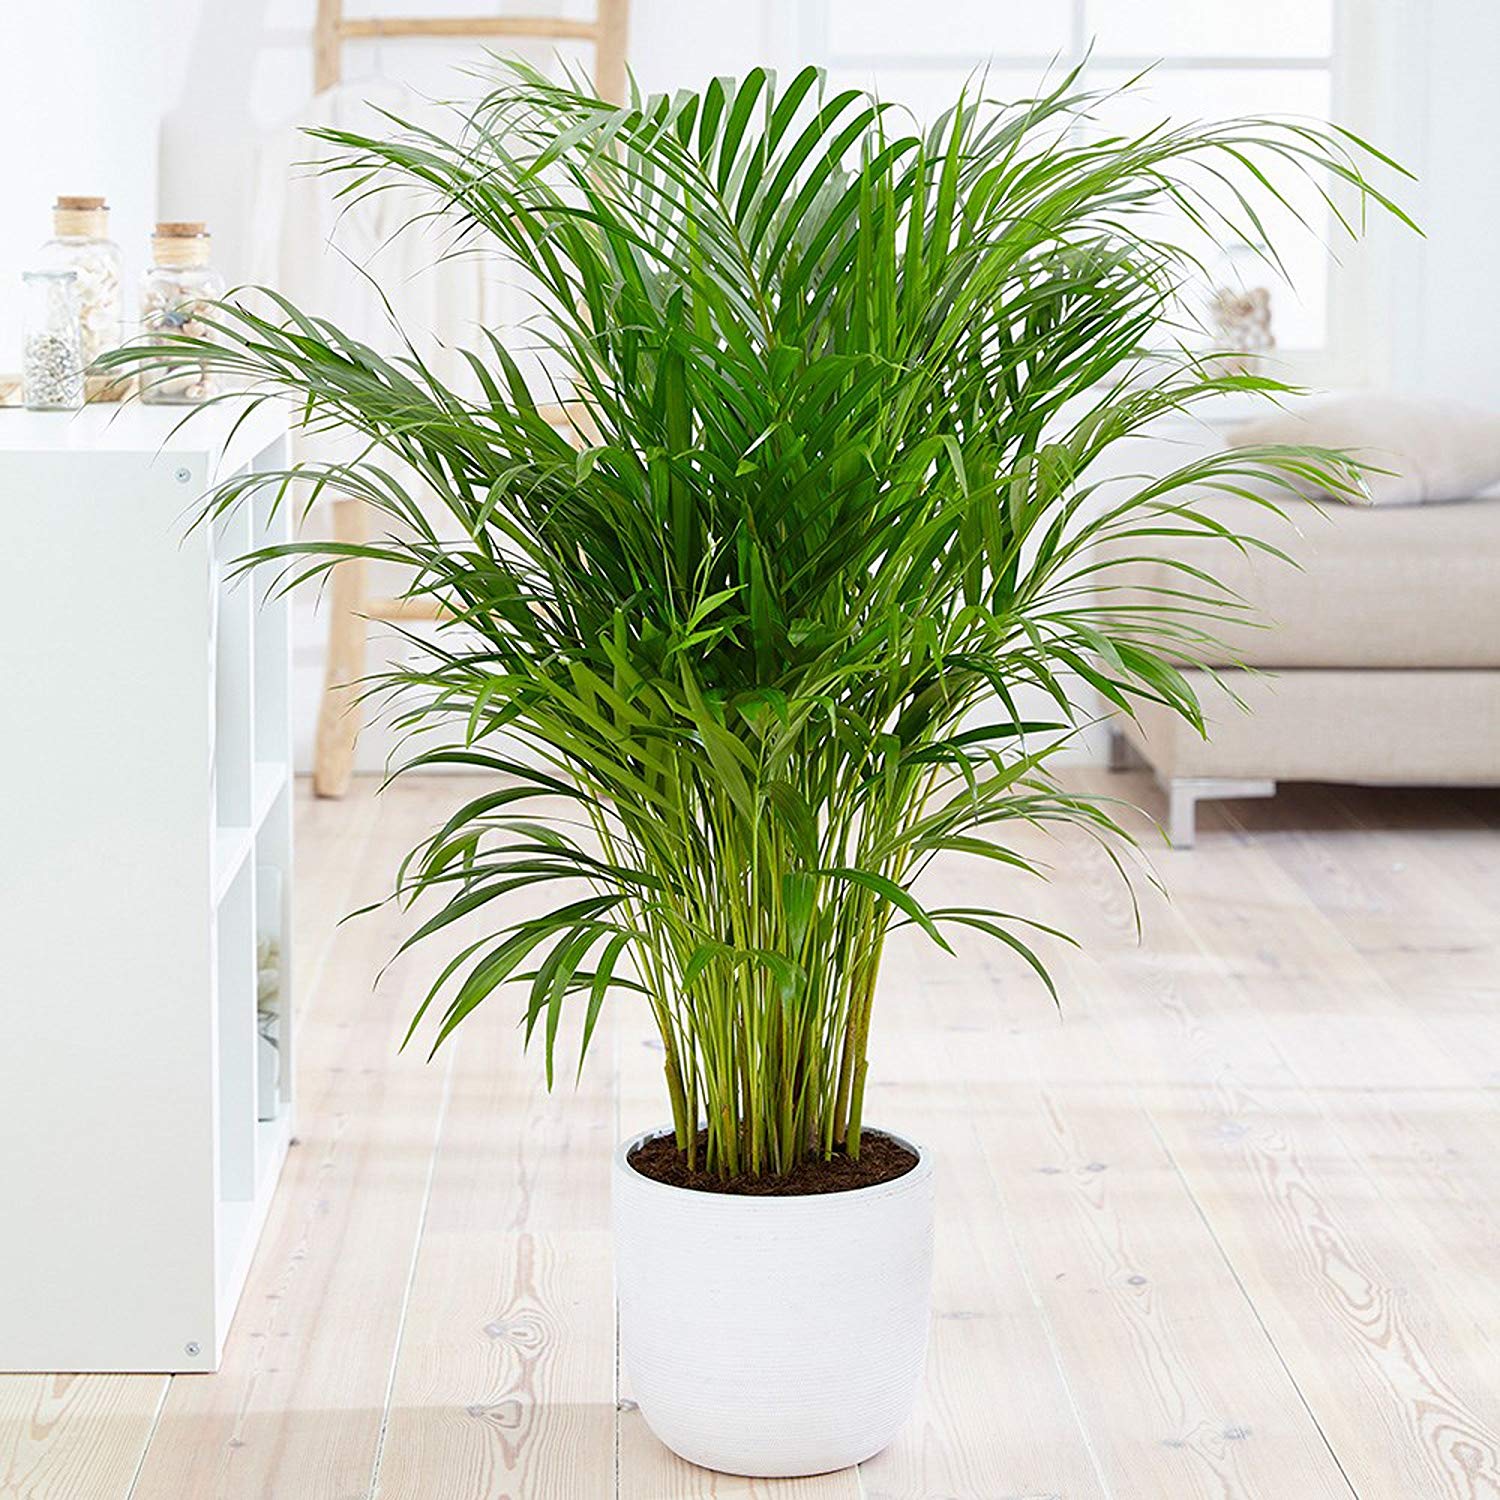 10 Best Indoor Air Purifying Plants from NASA Clean Air Study
